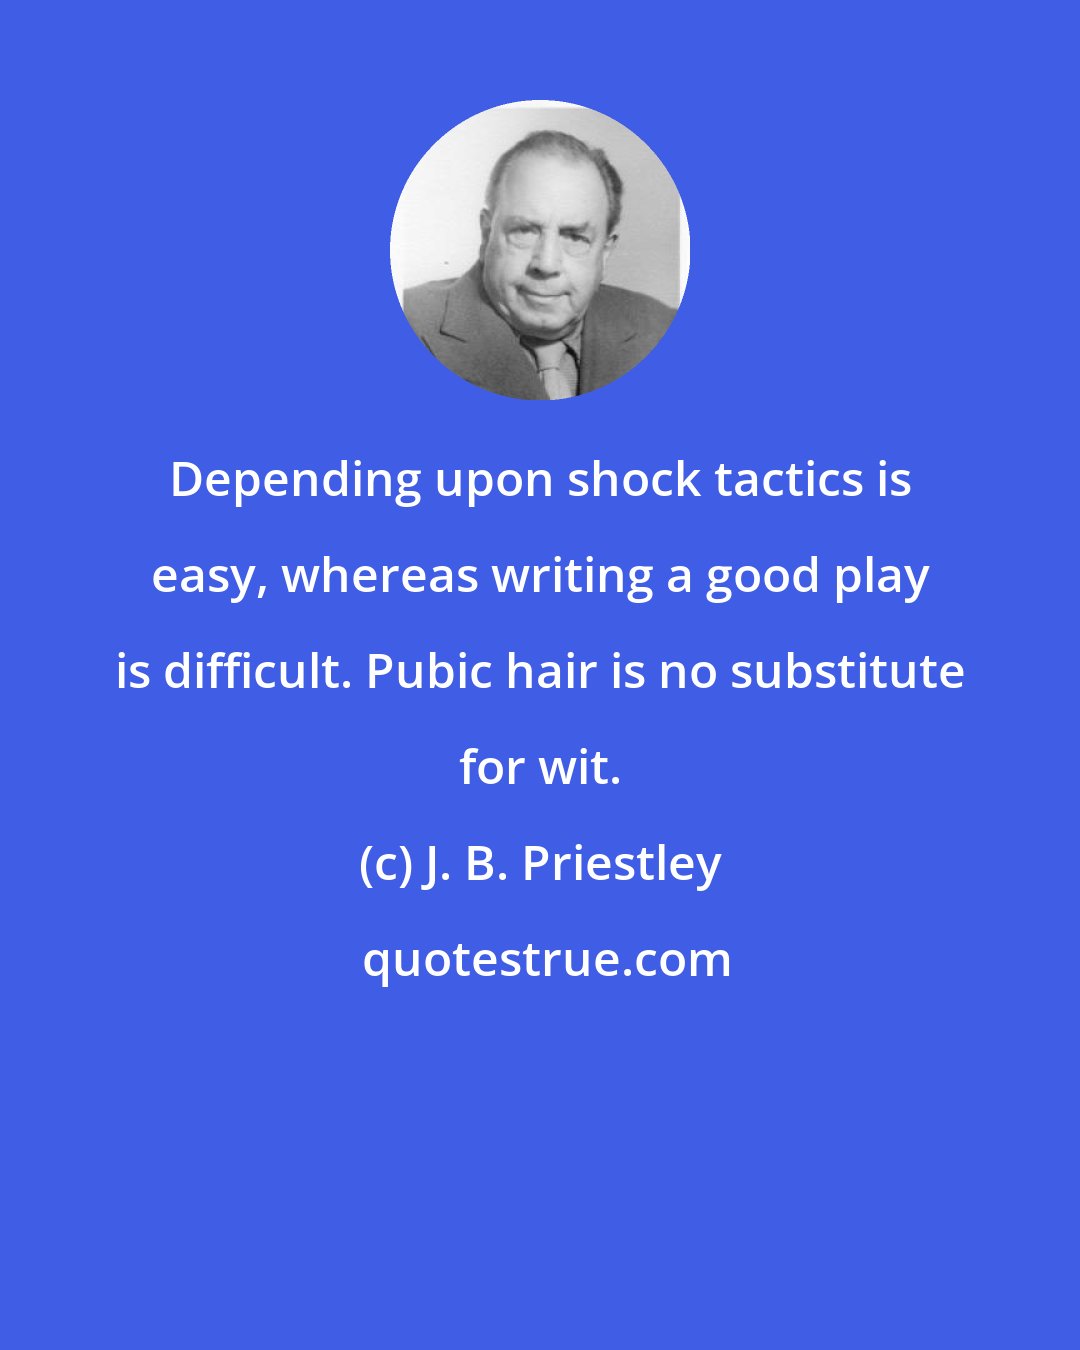 J. B. Priestley: Depending upon shock tactics is easy, whereas writing a good play is difficult. Pubic hair is no substitute for wit.